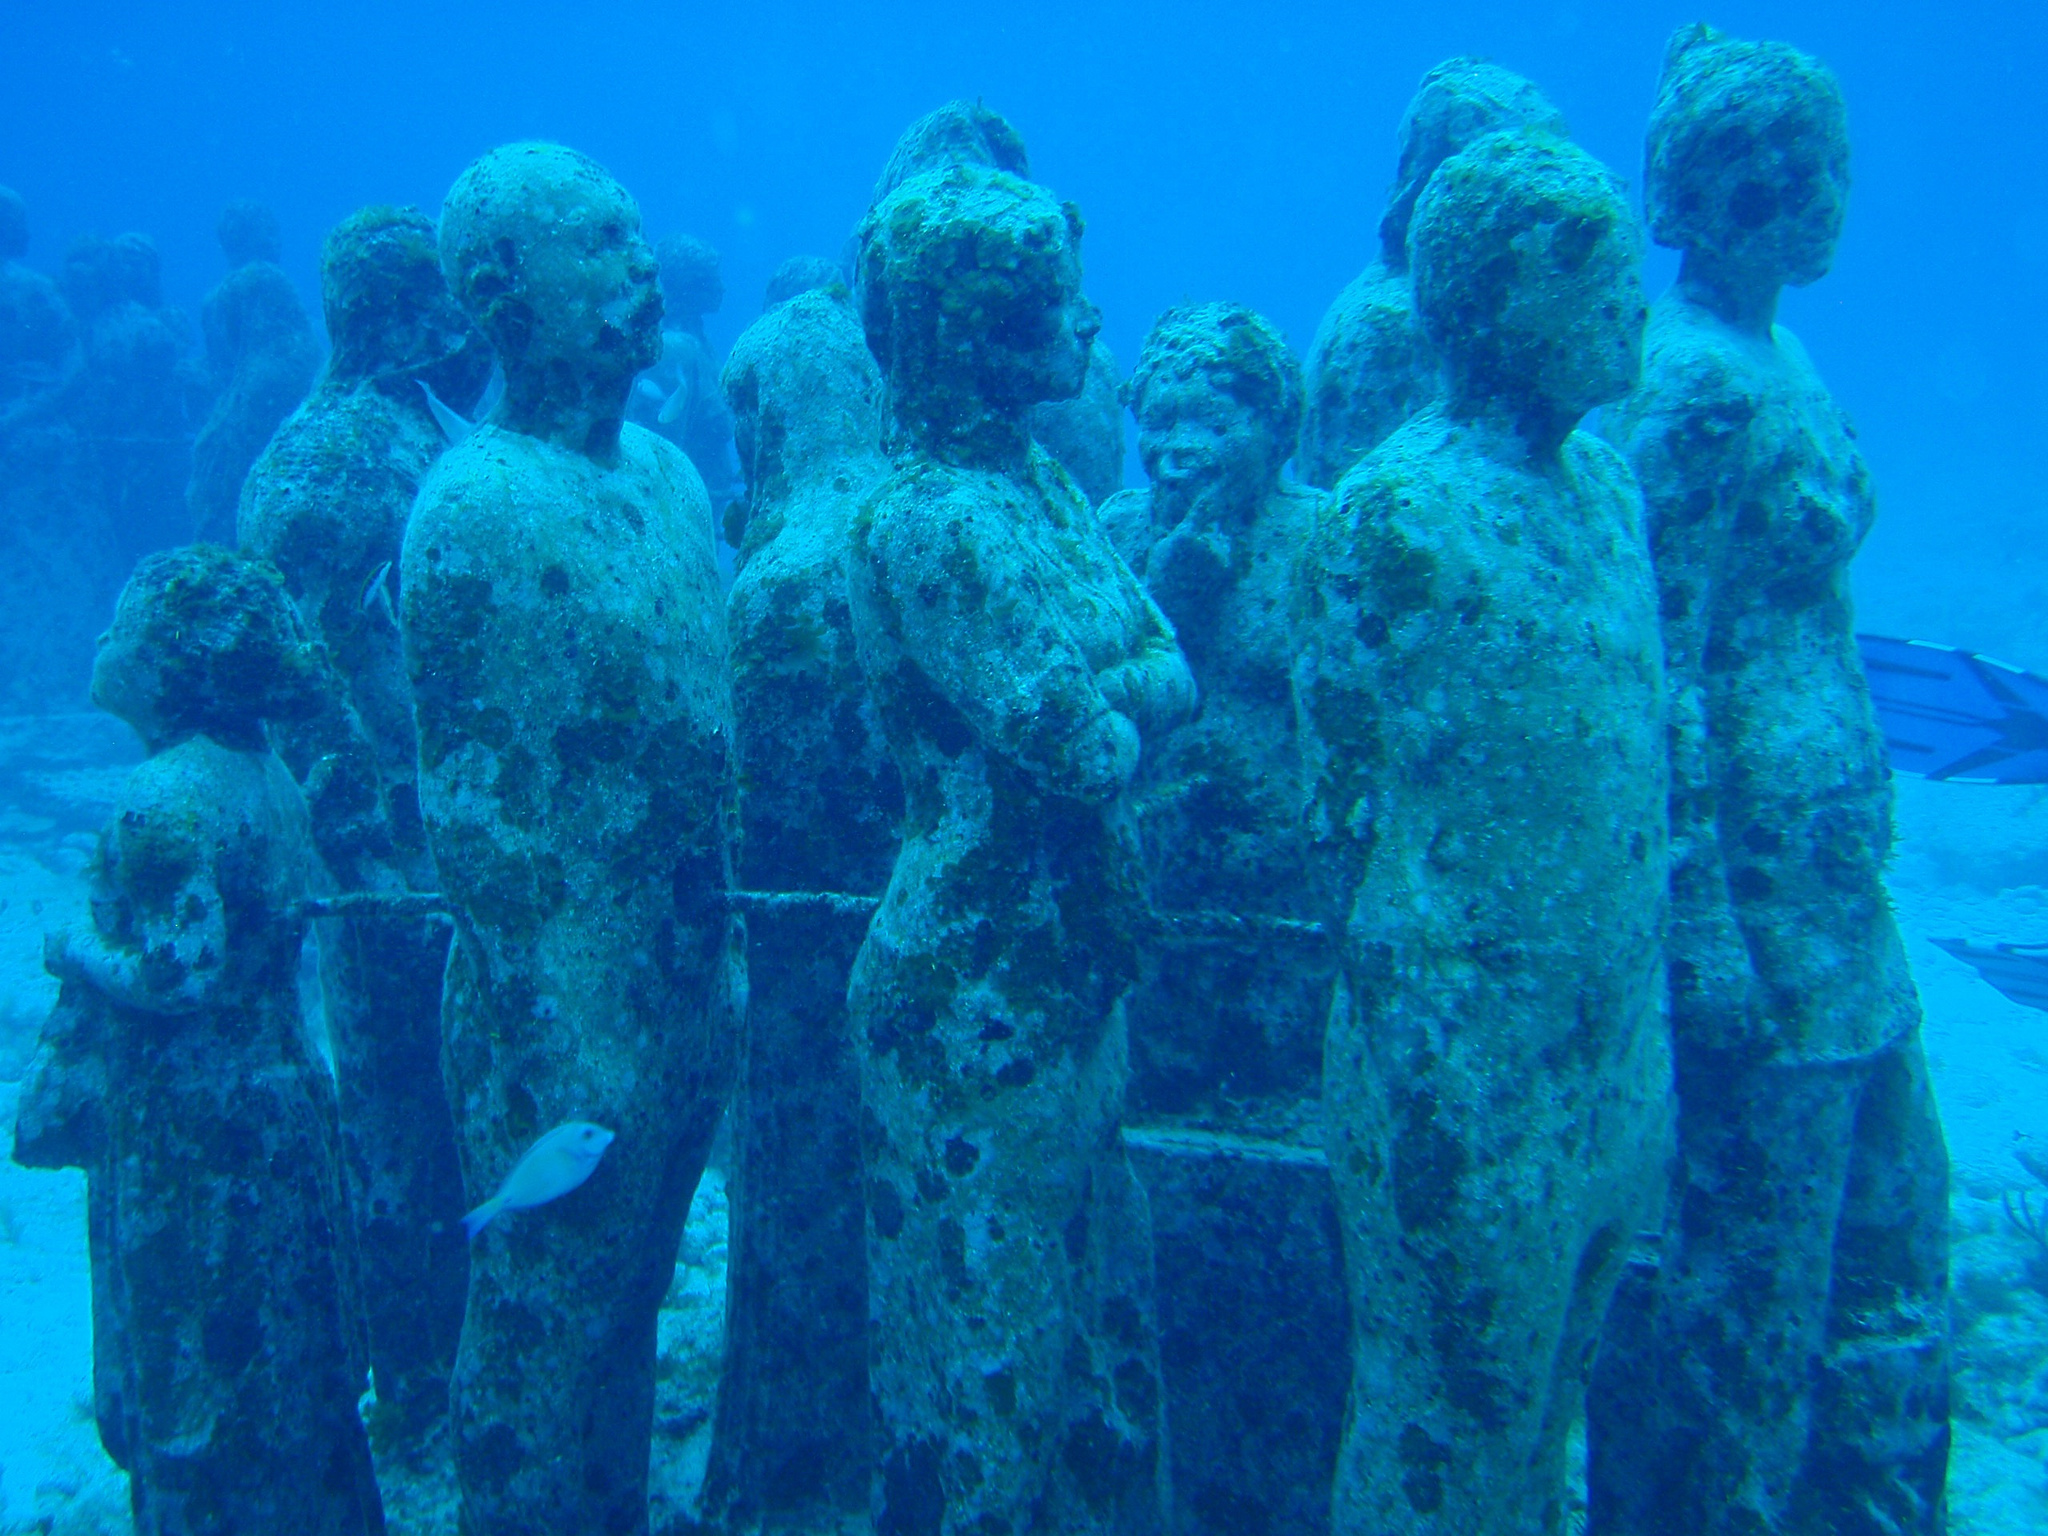 Museo Subacuatico, Cancun – a Wonderful Underwater Ecological Museum